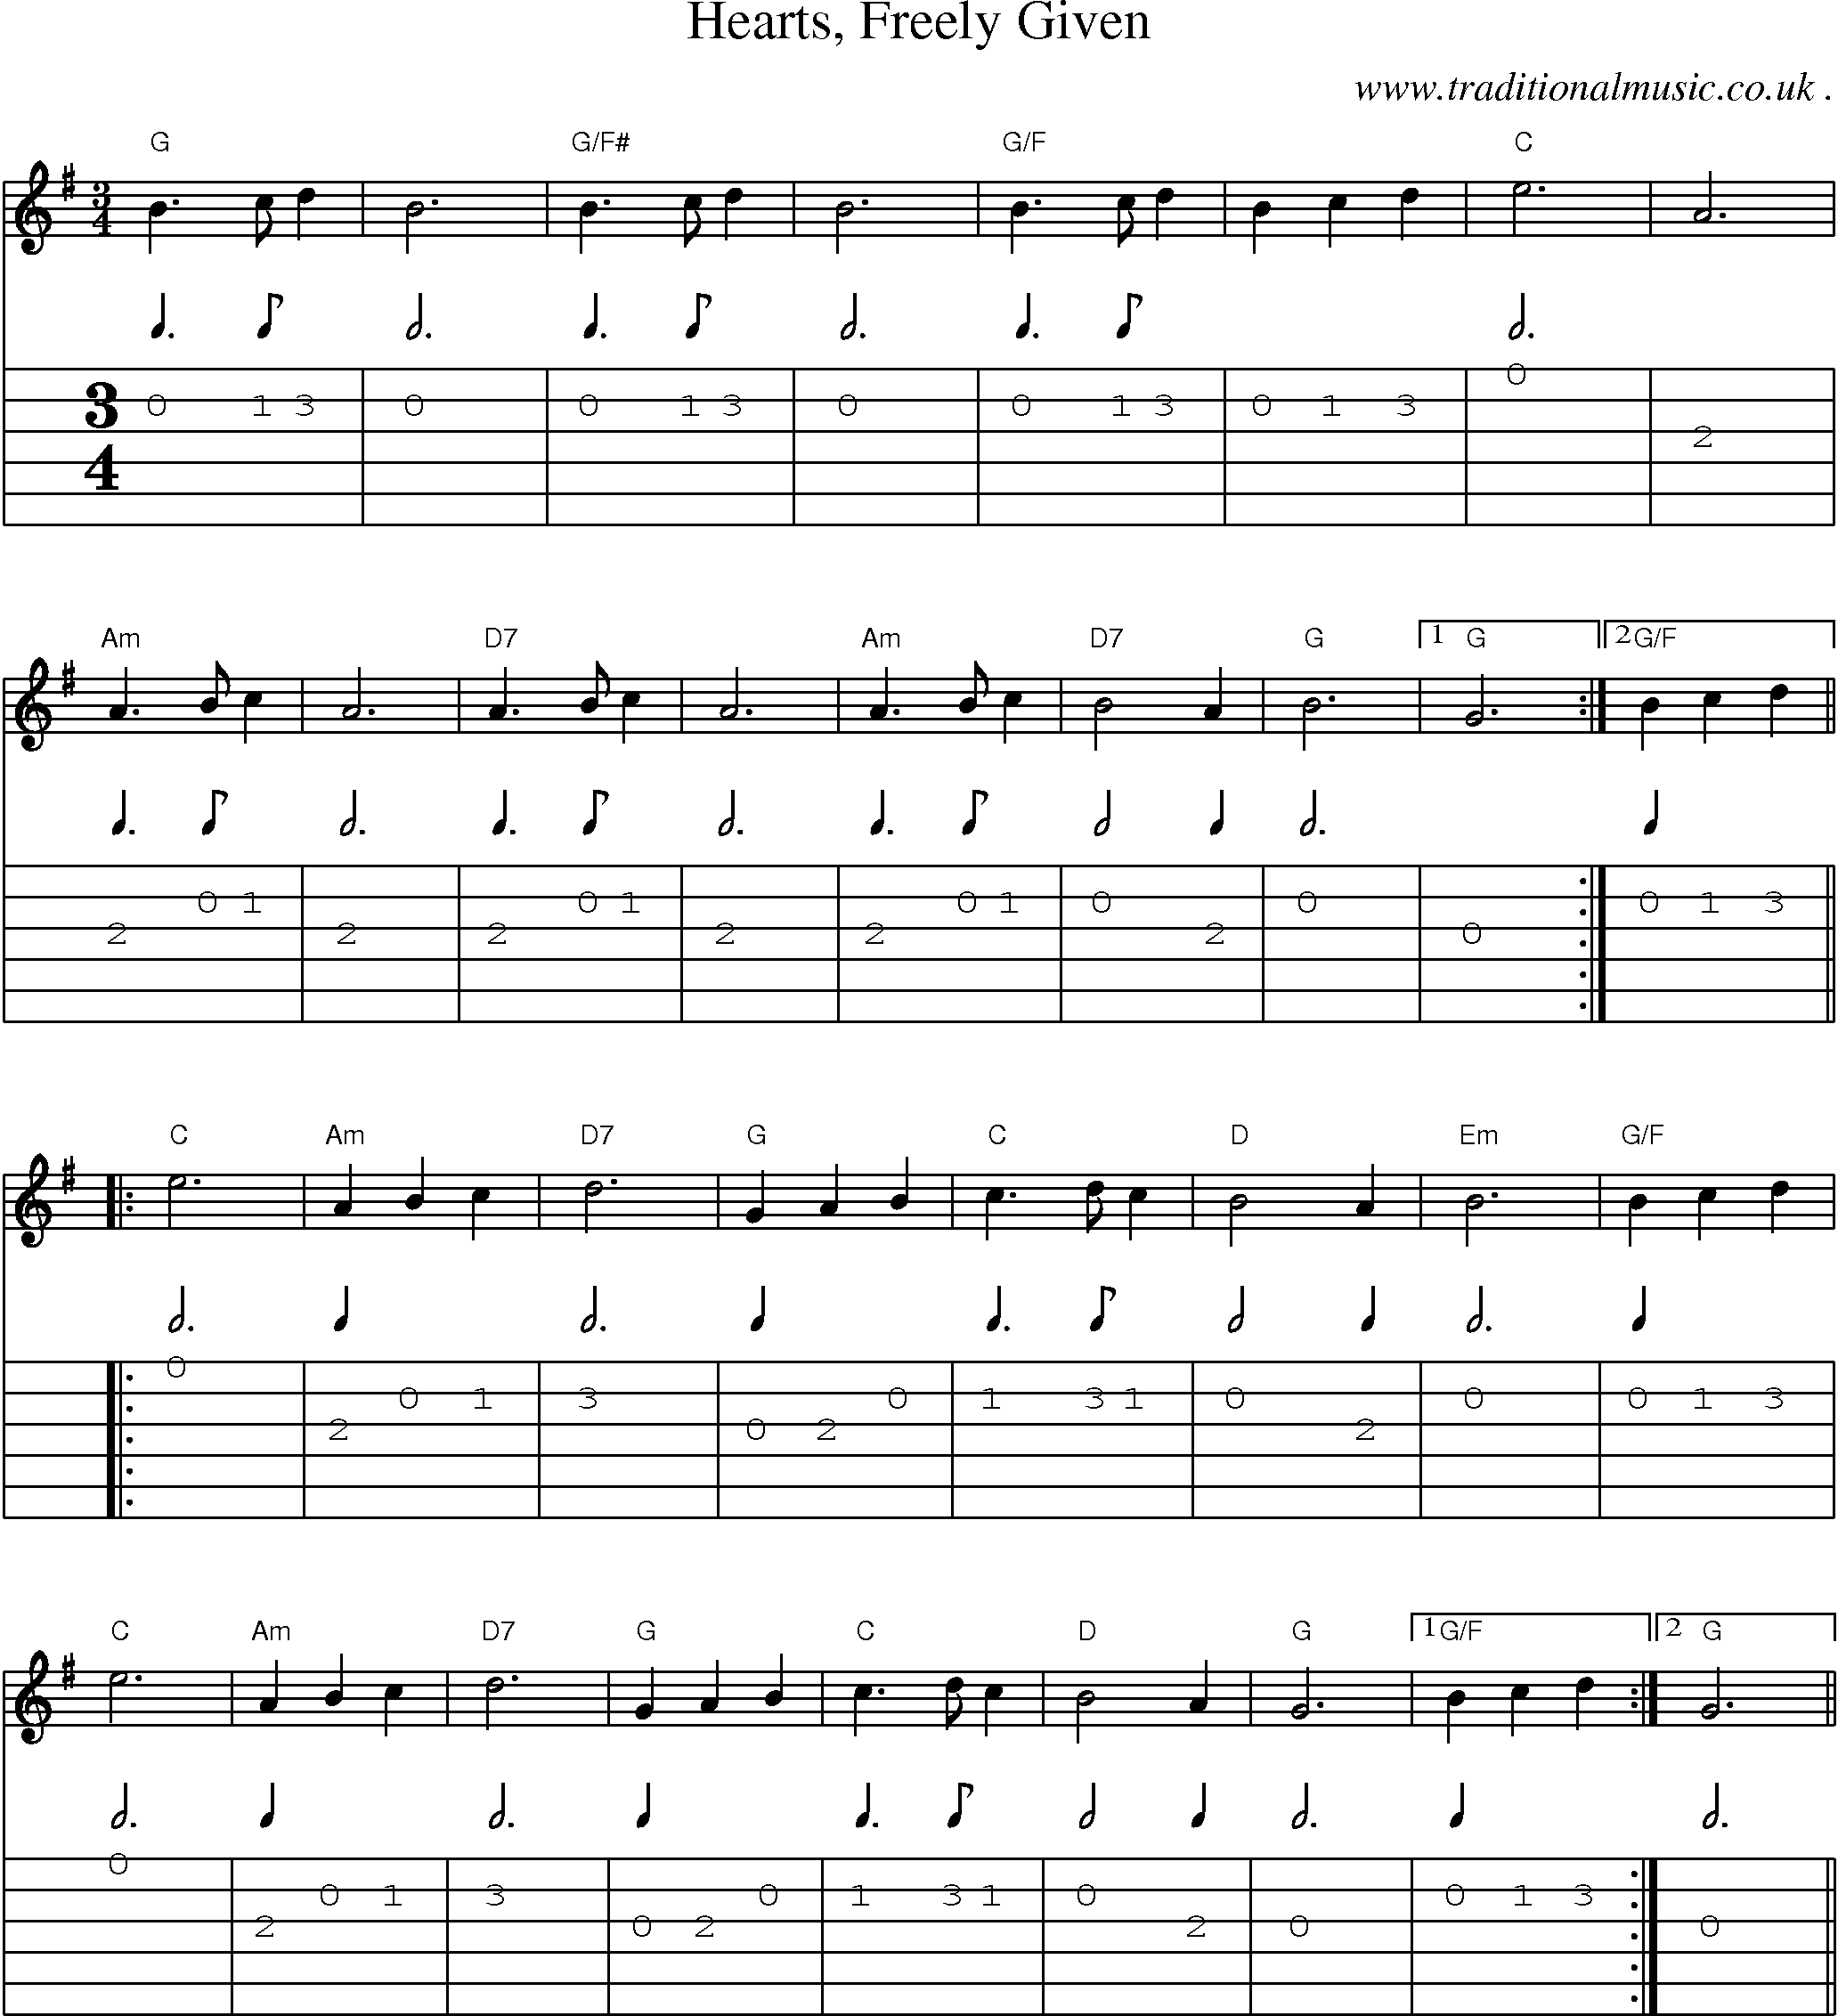 Music Score and Guitar Tabs for Hearts Freely Given